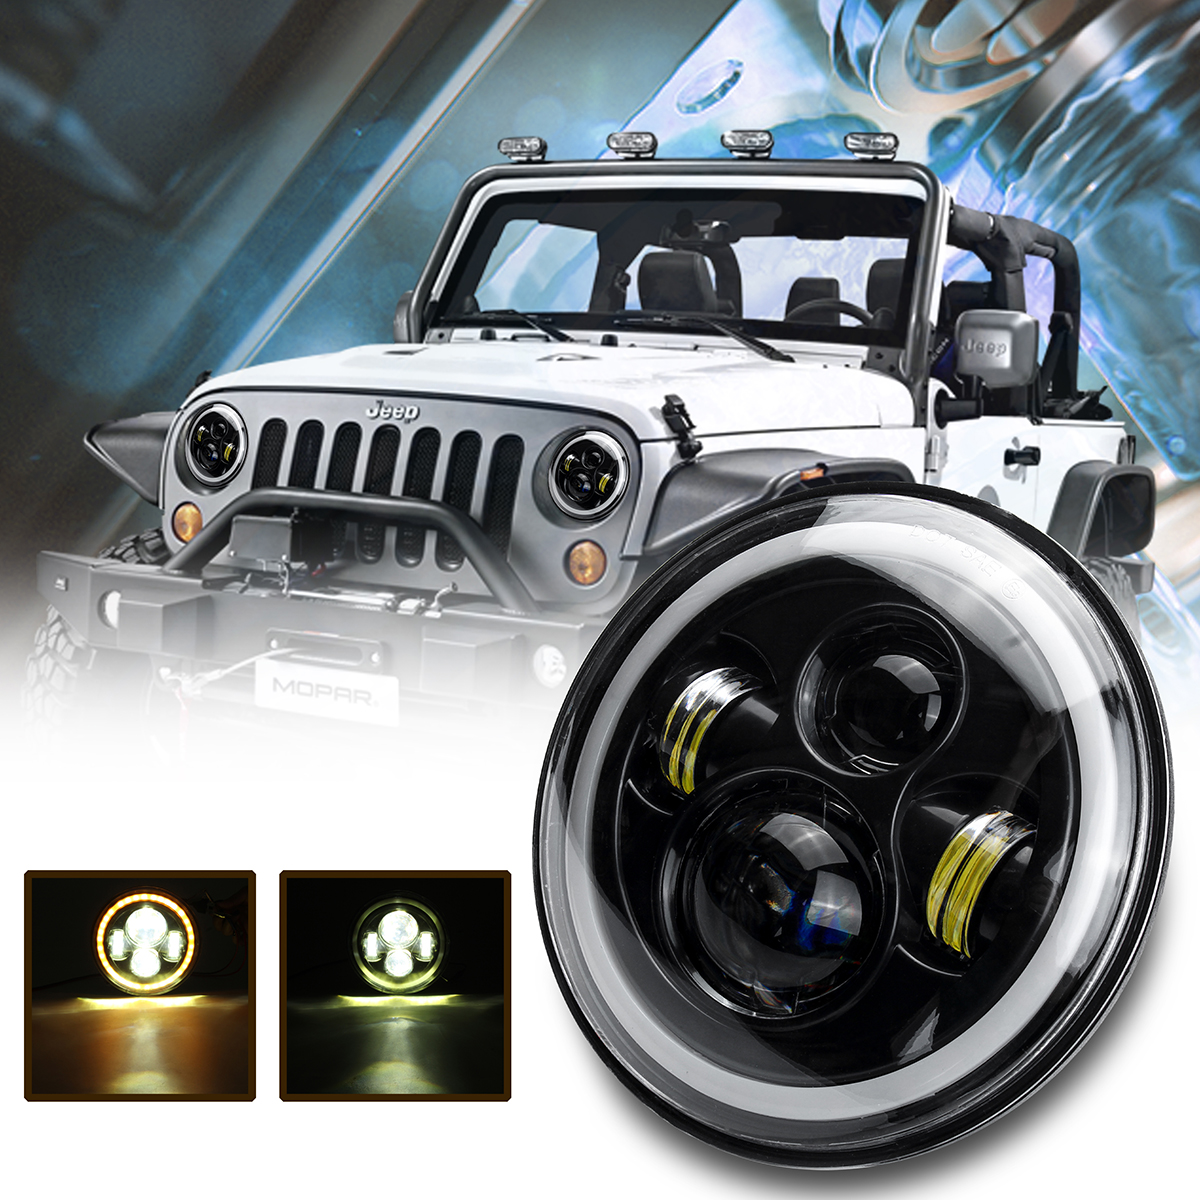 2Pcs 7 Inch Car round LED Headlights Head Turn Signal Lamps DRL High/Low Beam Waterproof IP67 for Jeep Wrangler - Auto GoShop